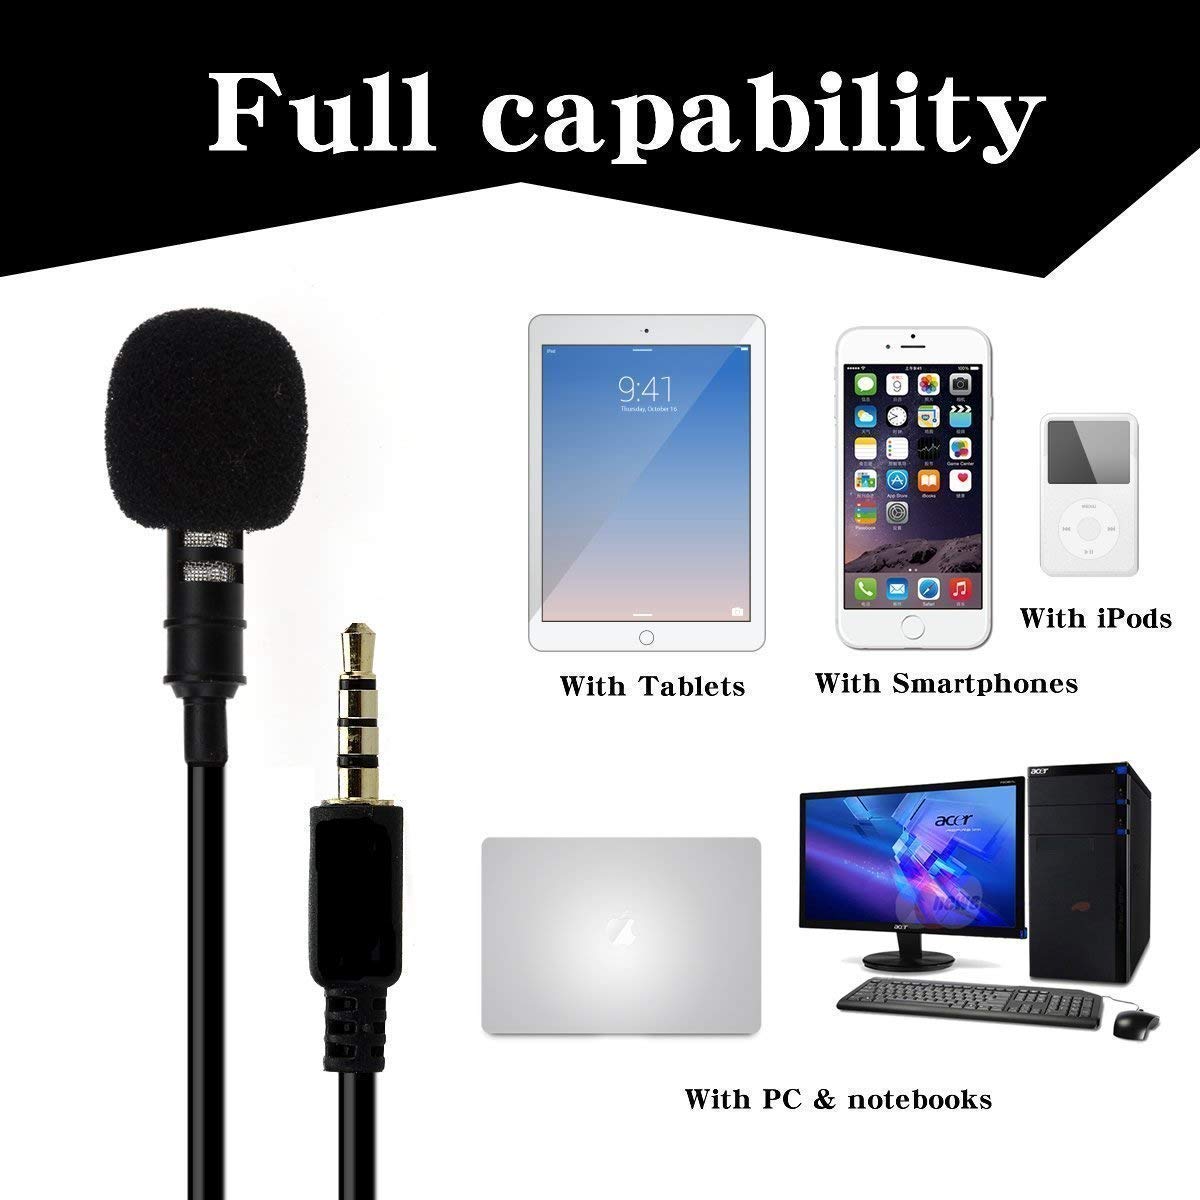 EYUVAA Premium 5 feet Lavalier Microphone Collar Mic for Mobile Recording, Condenser Mic for Smartphones, PC, Recording Youtube, Interview, Video Conference (Black)